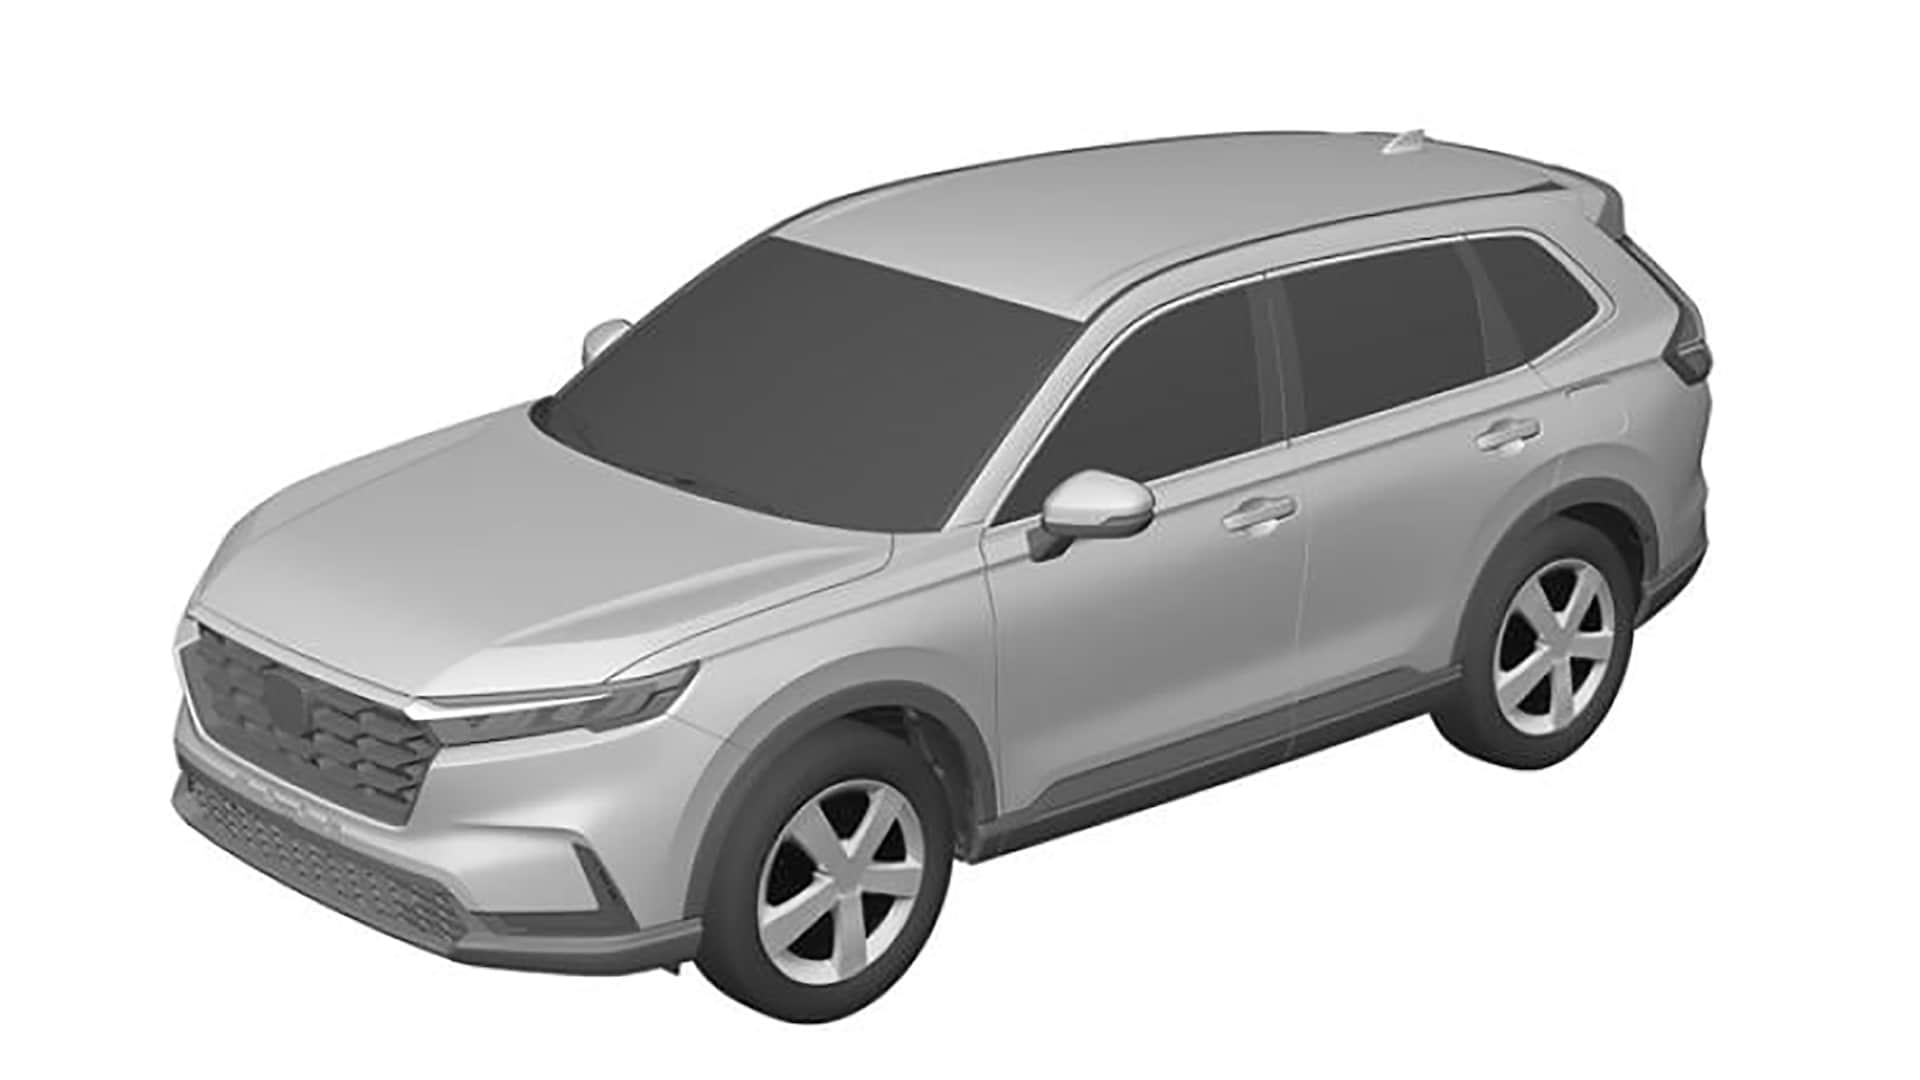 The Next Honda CR V? This Sure Looks Like The New SUV